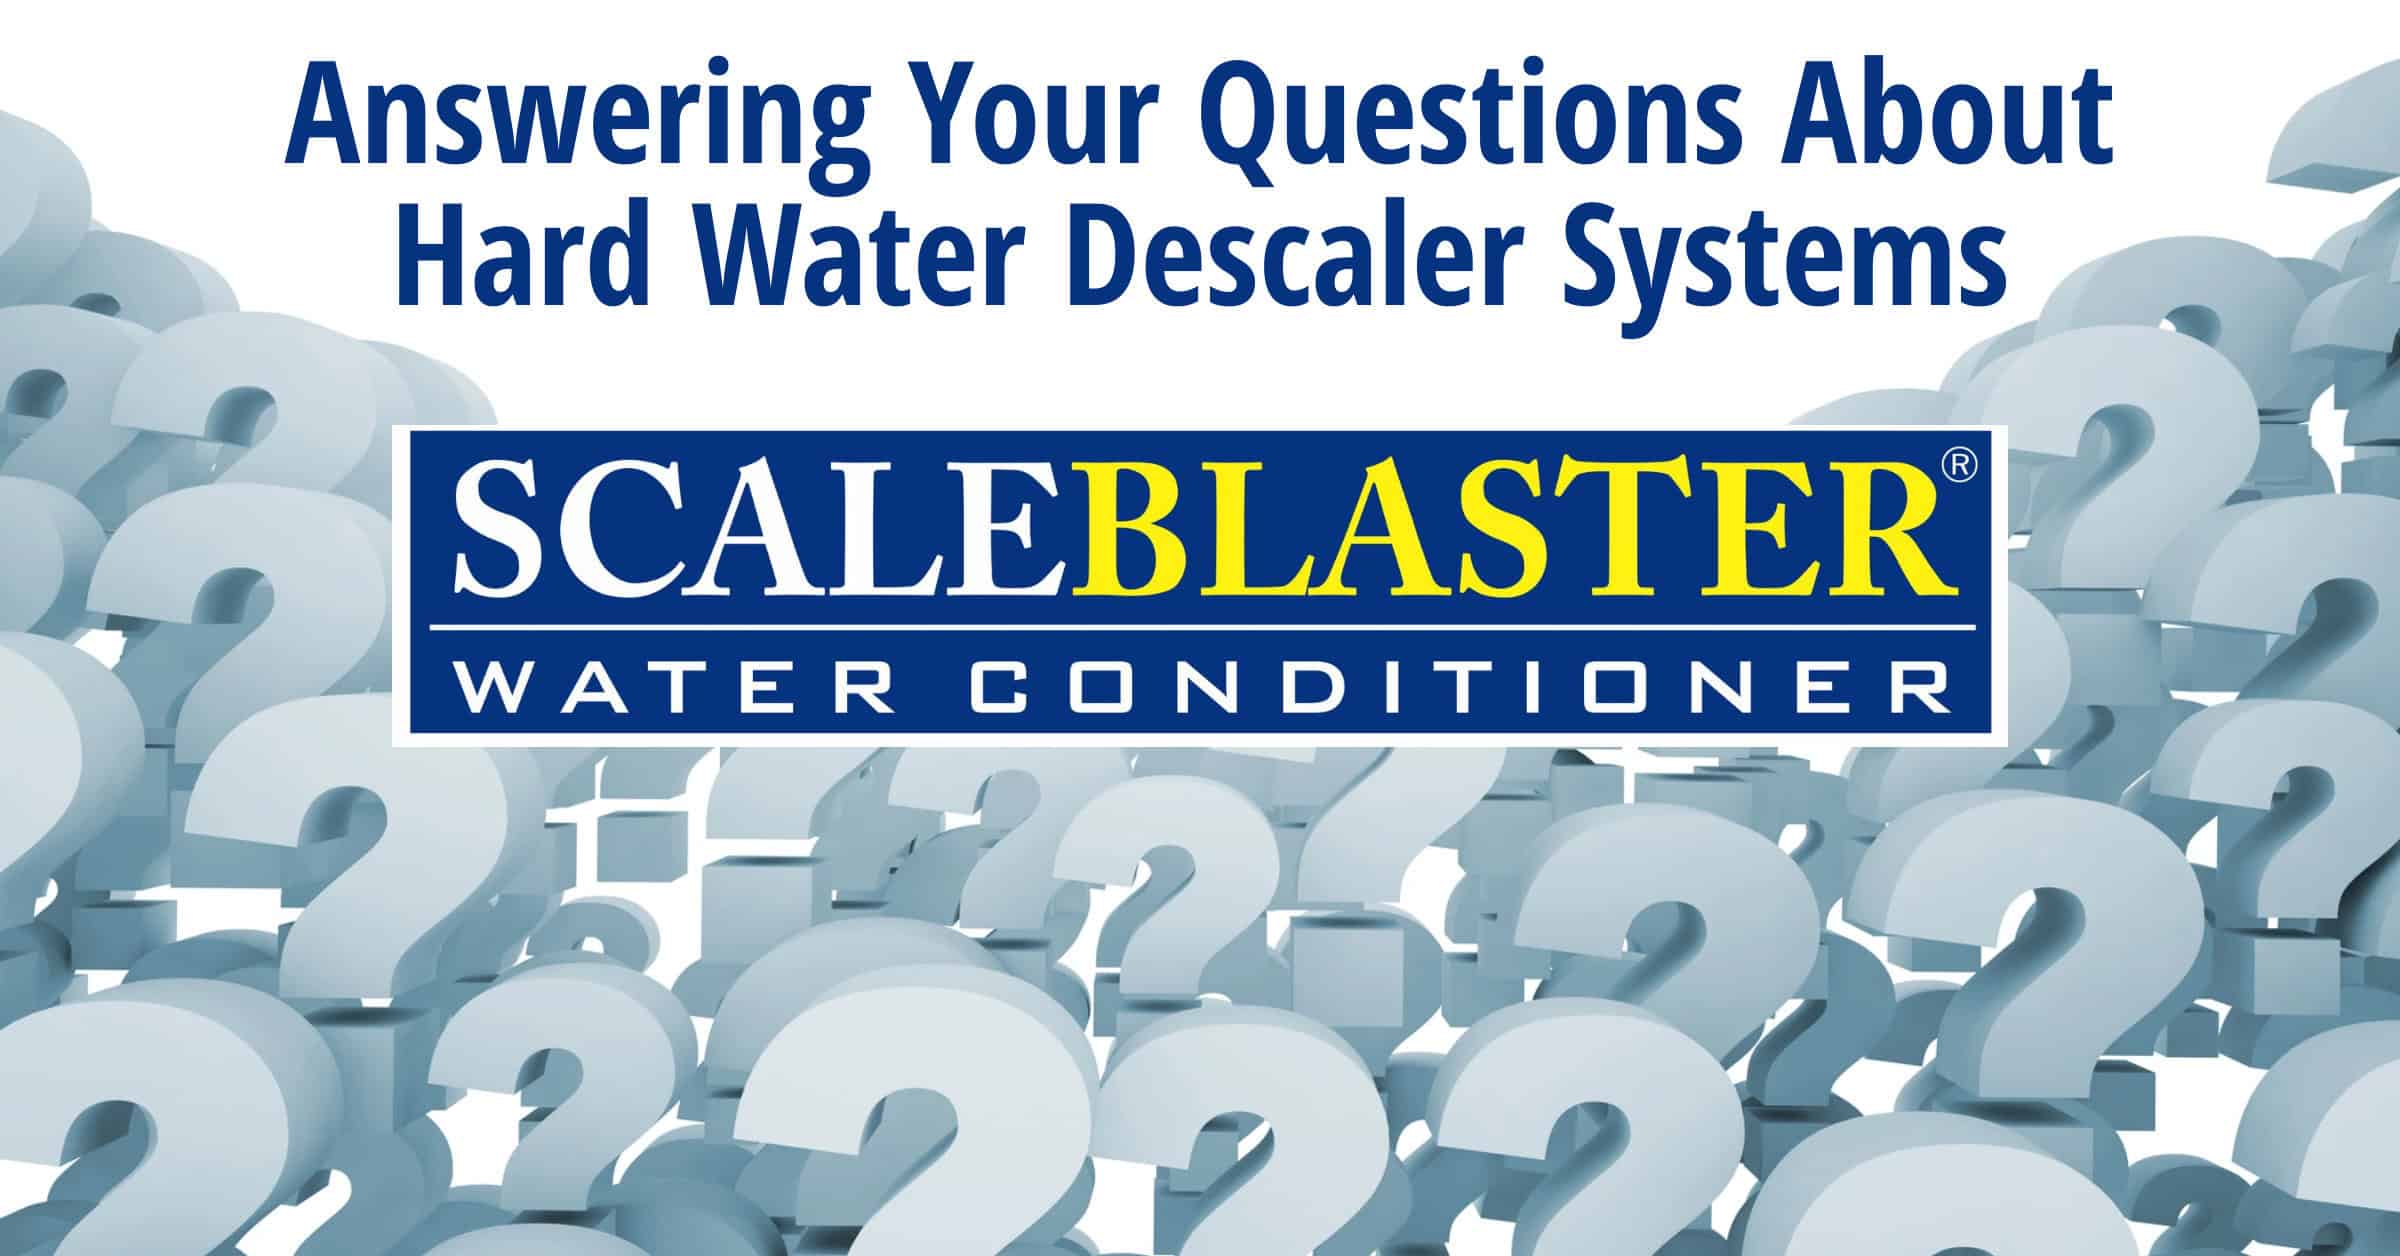 Answering Your Questions About Hard Water Descaler Systems